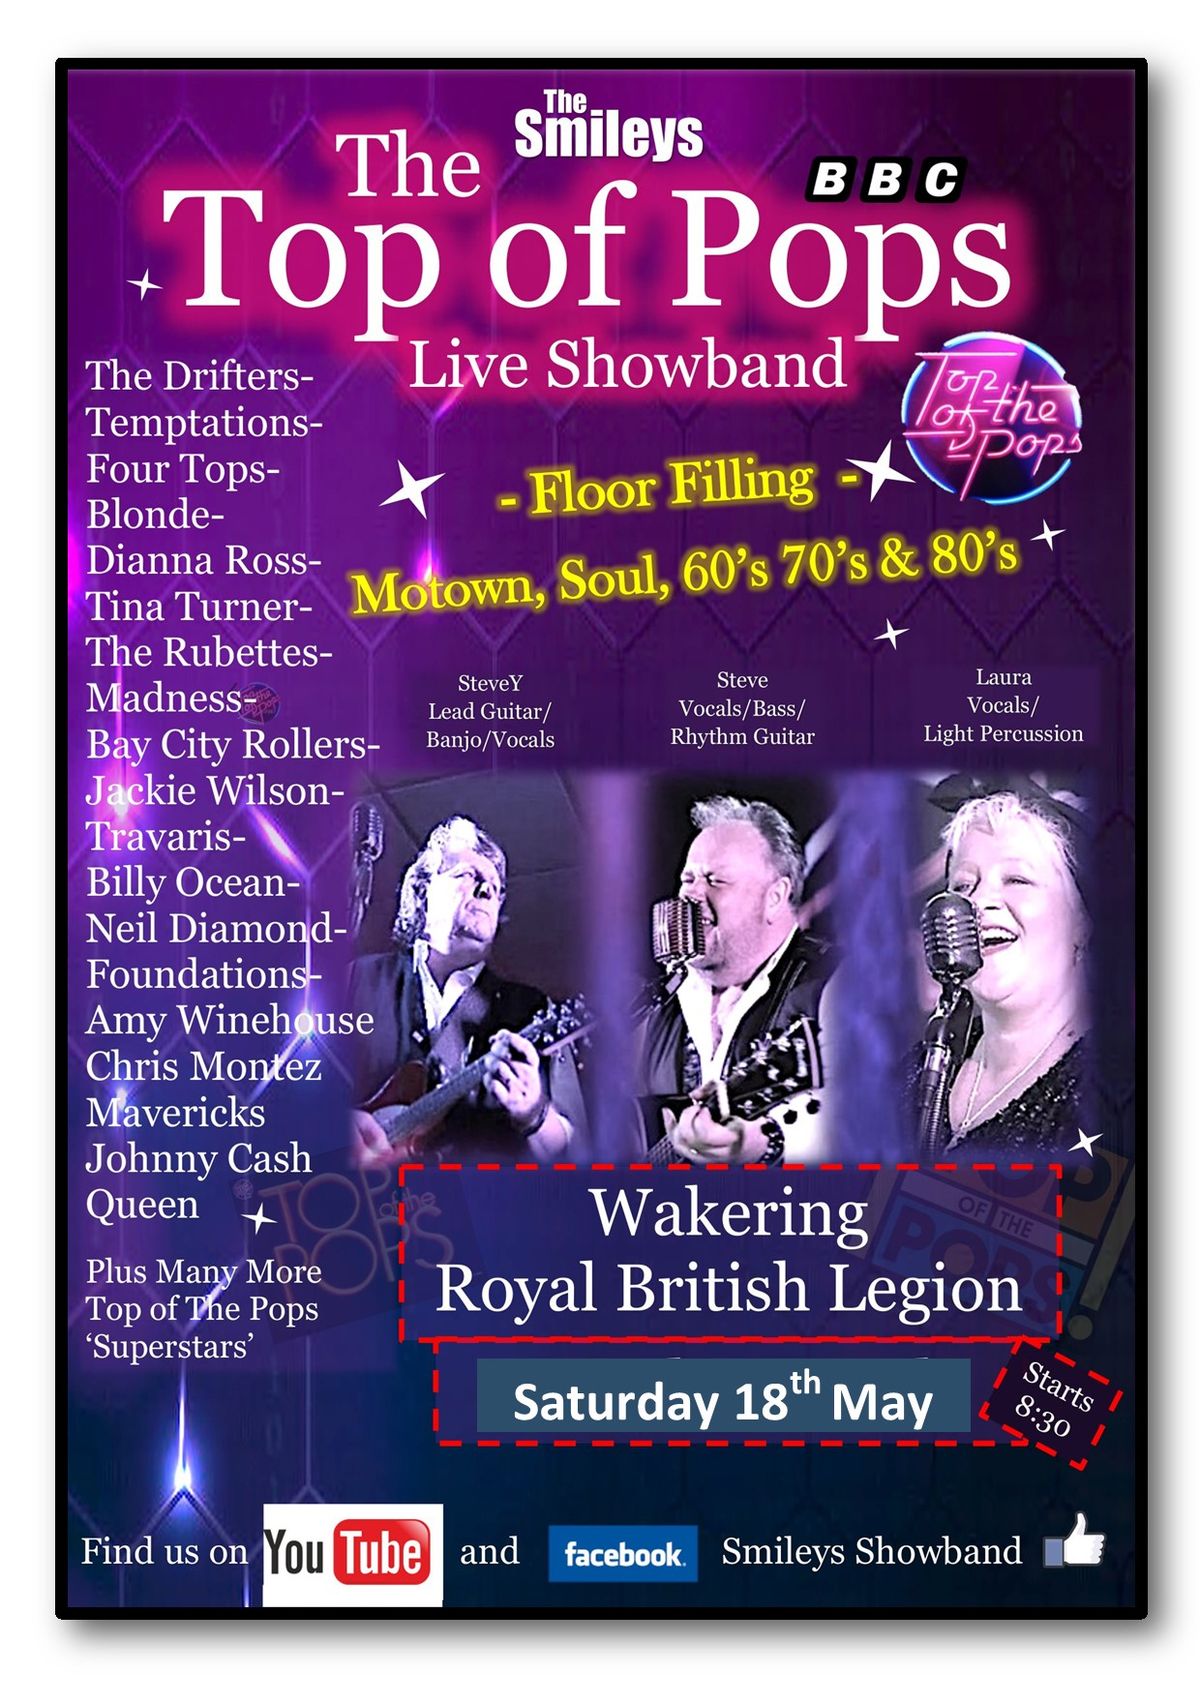 Top of the Pops Showband